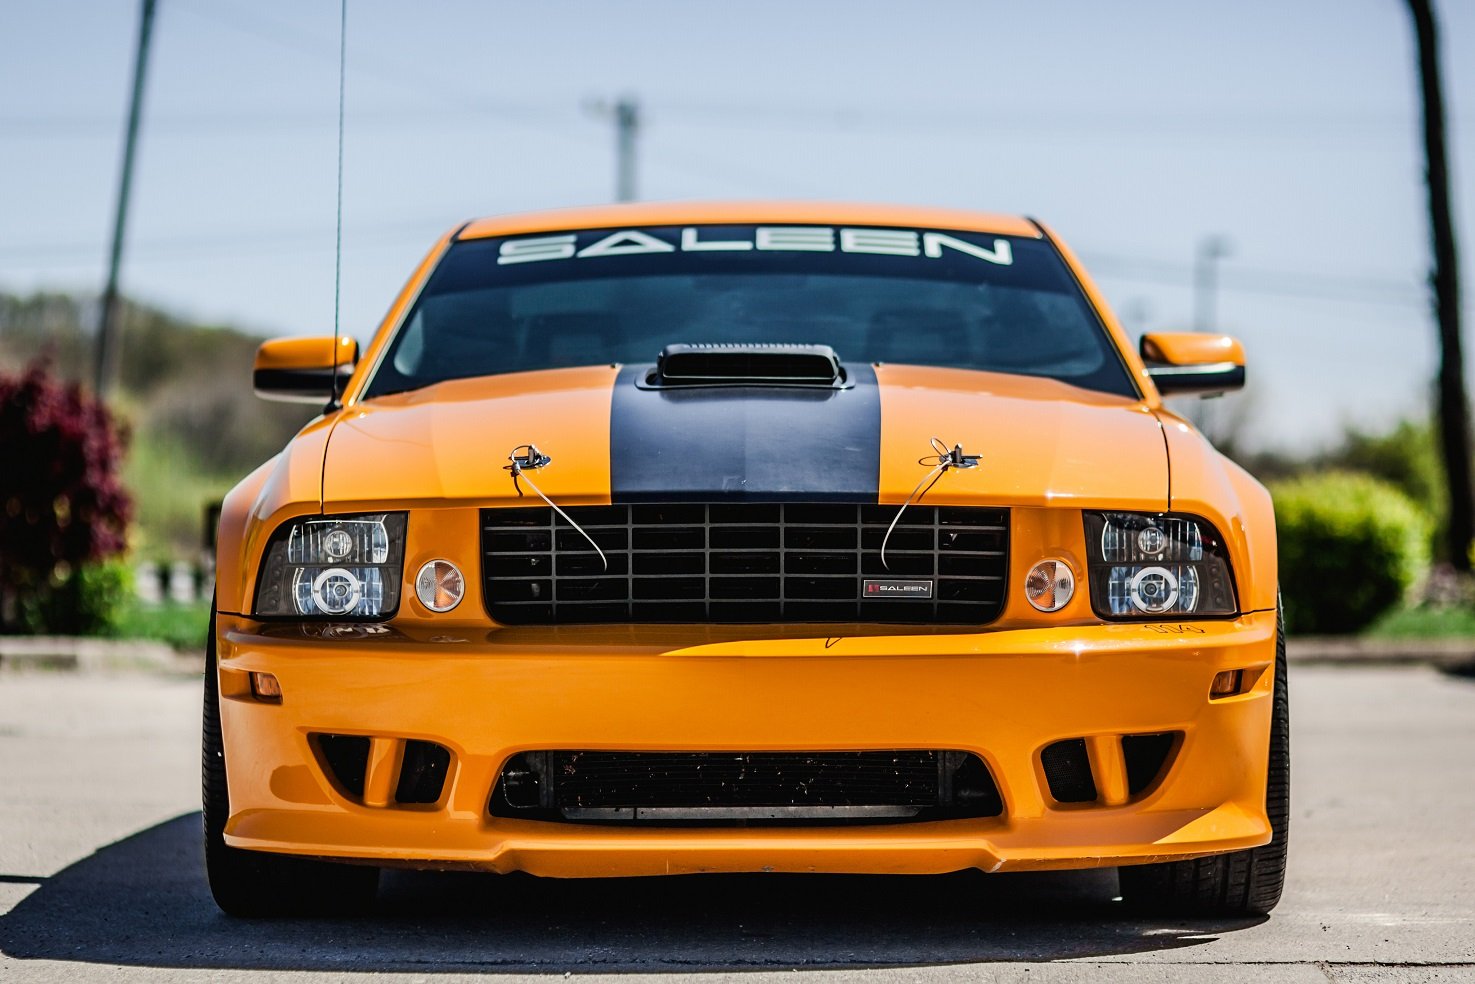 saleen, Ford, Mustang, S3, 02extreme, Cars, Modified, 2008 Wallpaper